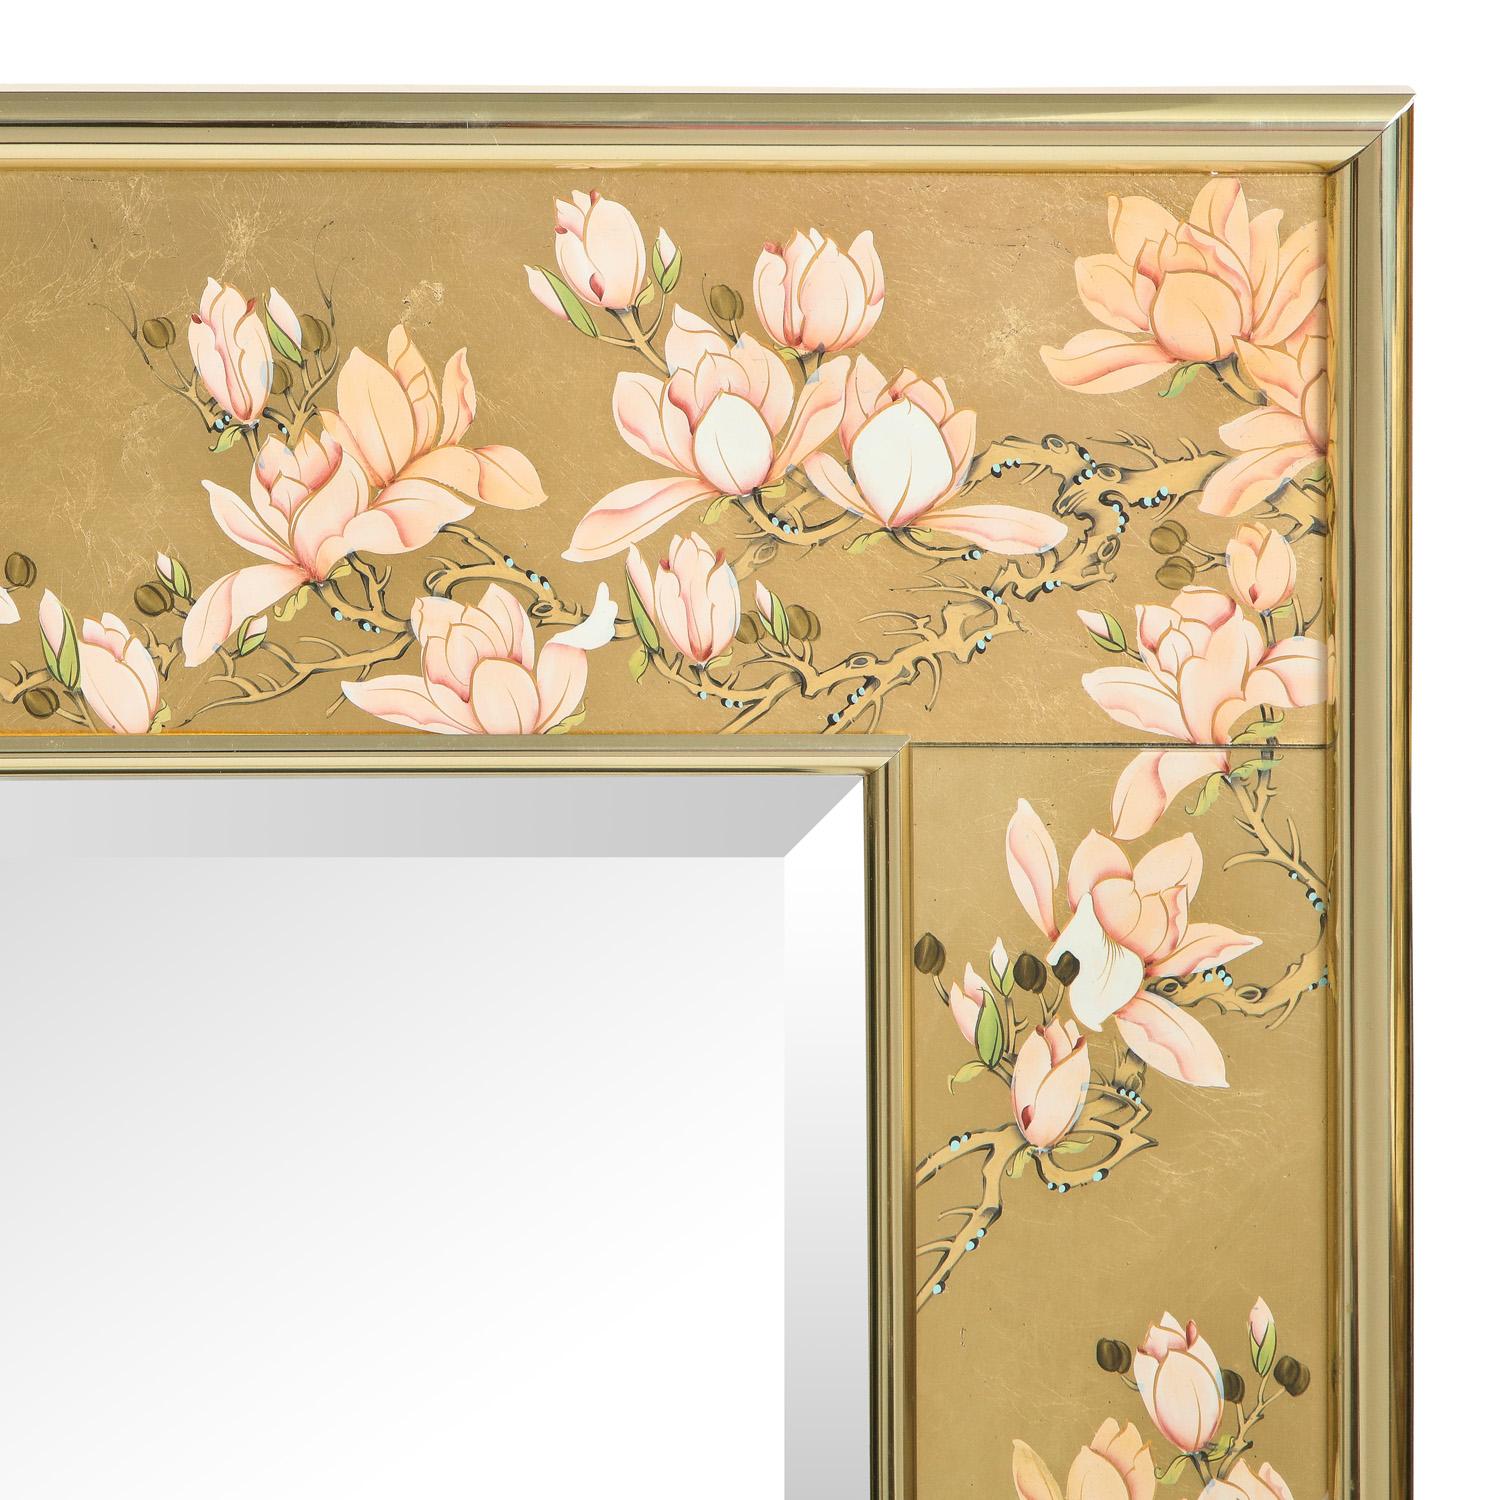 Chinoiserie Artisan Reverse Painted Mirror in Gold Leaf with Magnolia Branches 1988 'Signed'